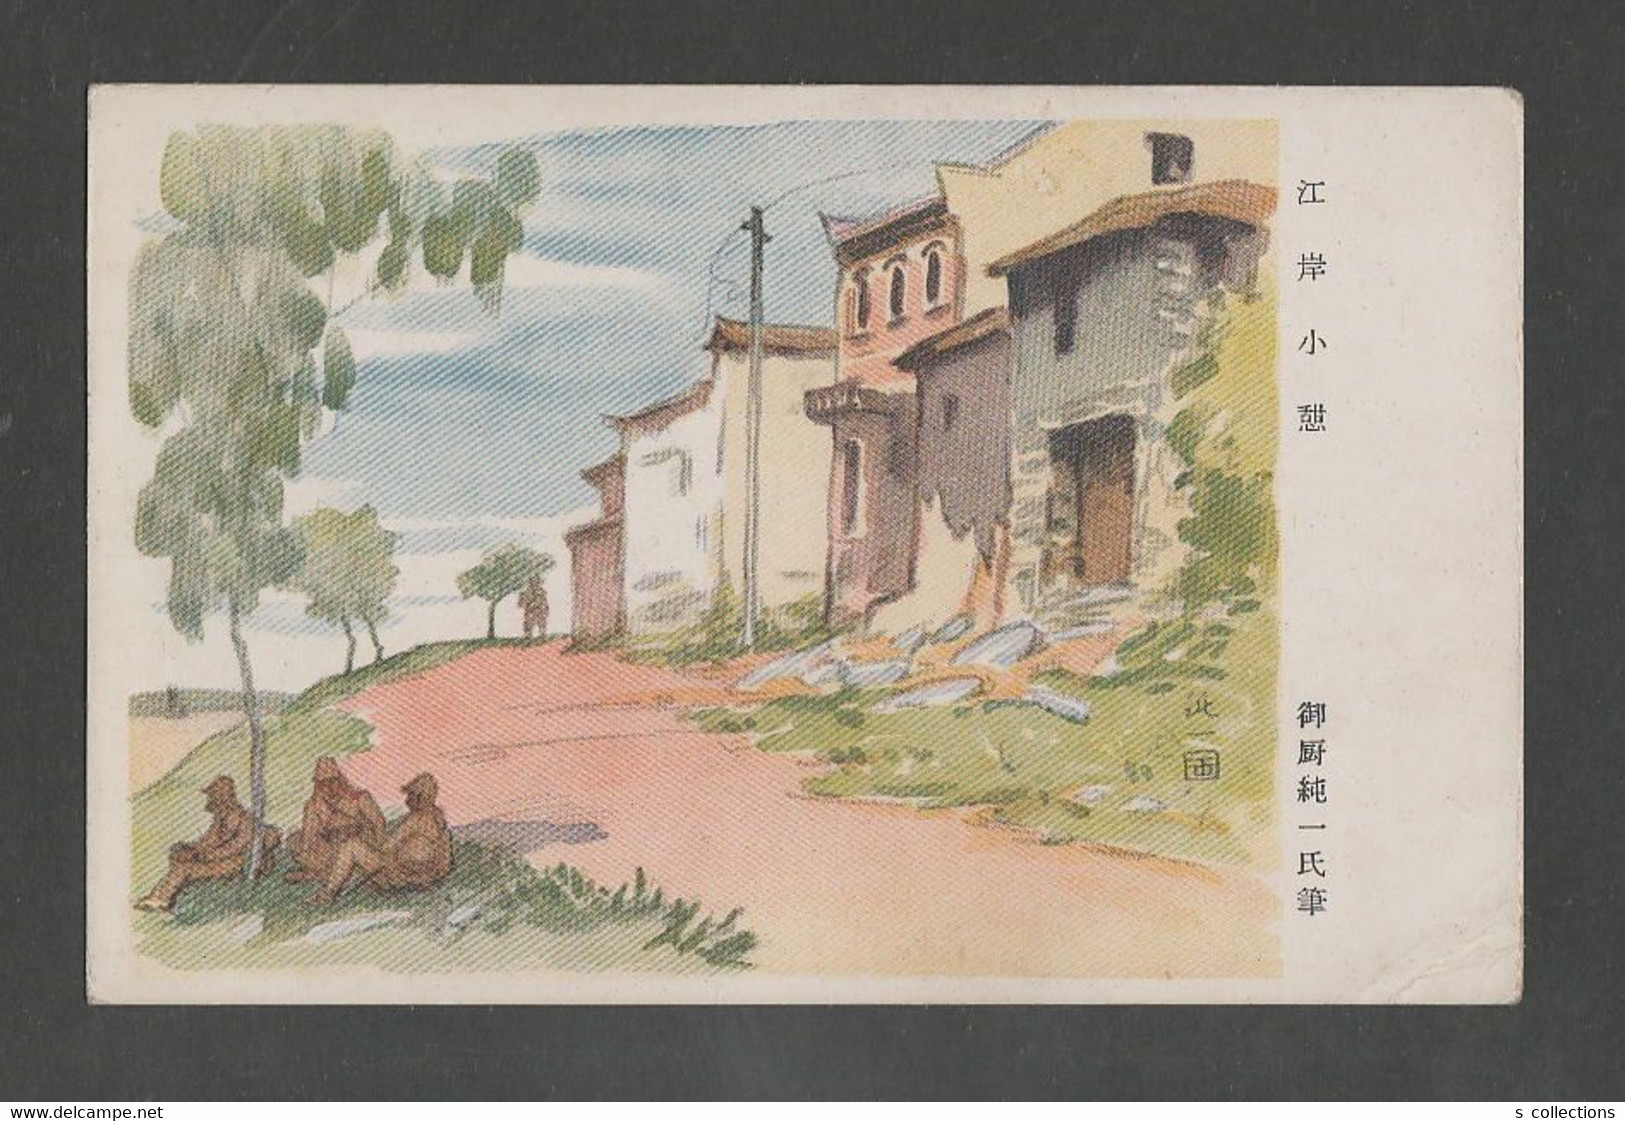 JAPAN WWII Military Jiang'an Picture Postcard NORTH CHINA WW2 MANCHURIA CHINE MANDCHOUKOUO JAPON GIAPPONE - 1941-45 Northern China